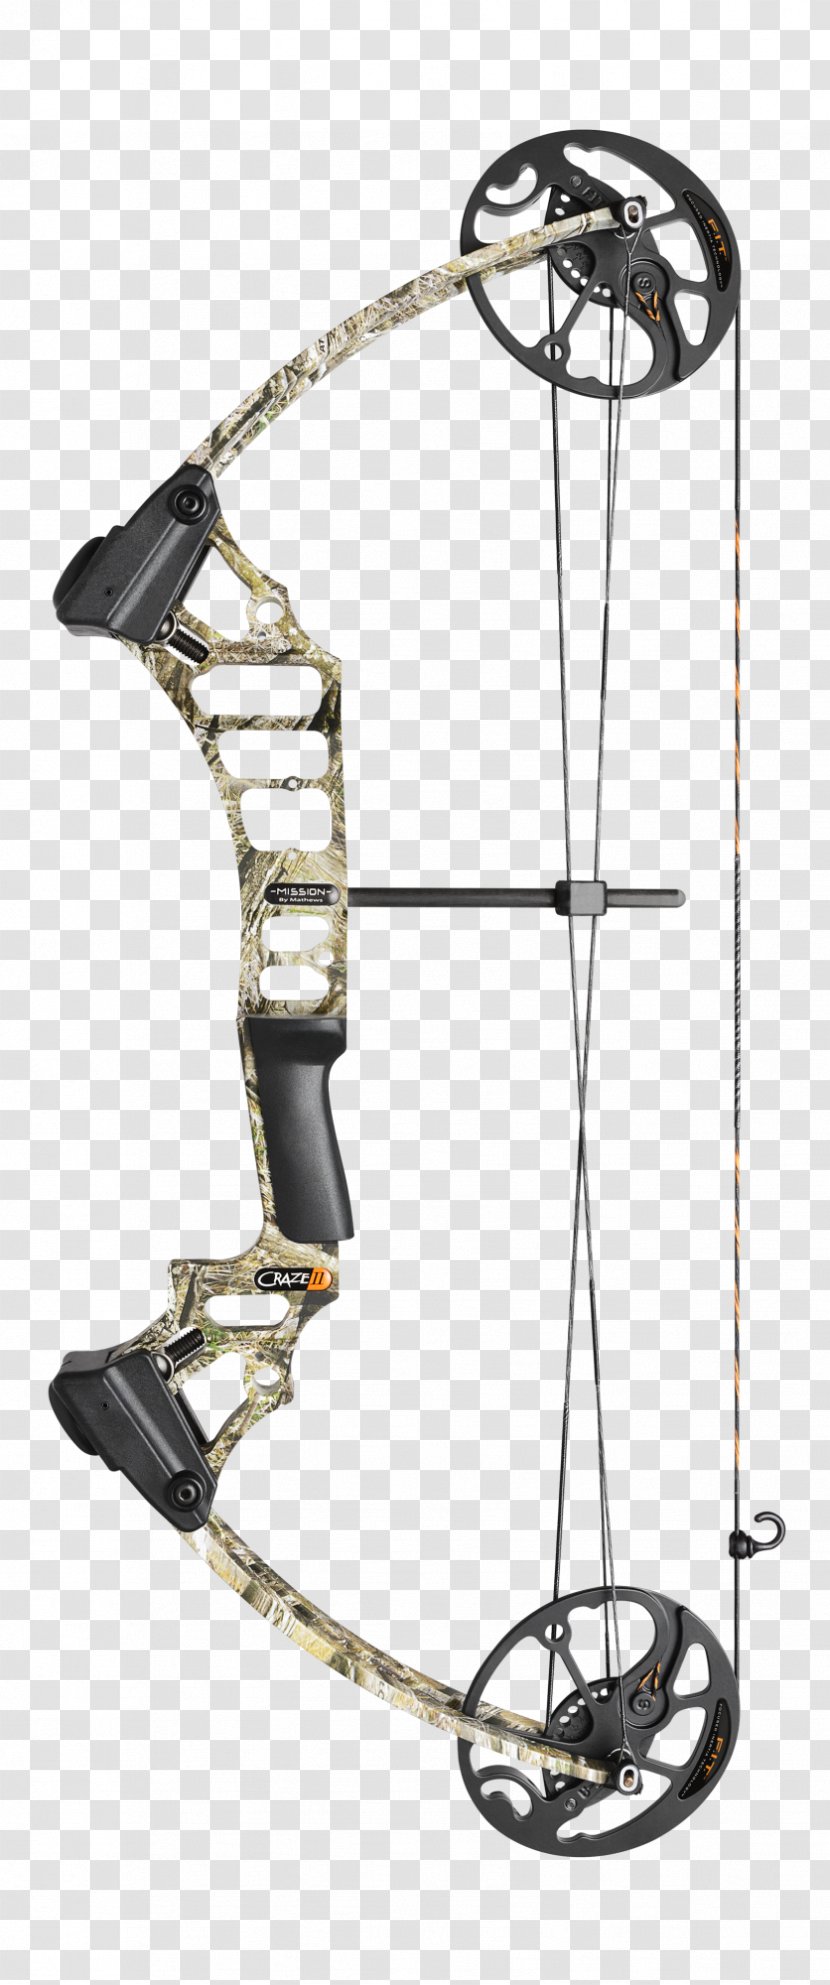 Archery Bow And Arrow Compound Bows Bowhunting - Web Shop Transparent PNG